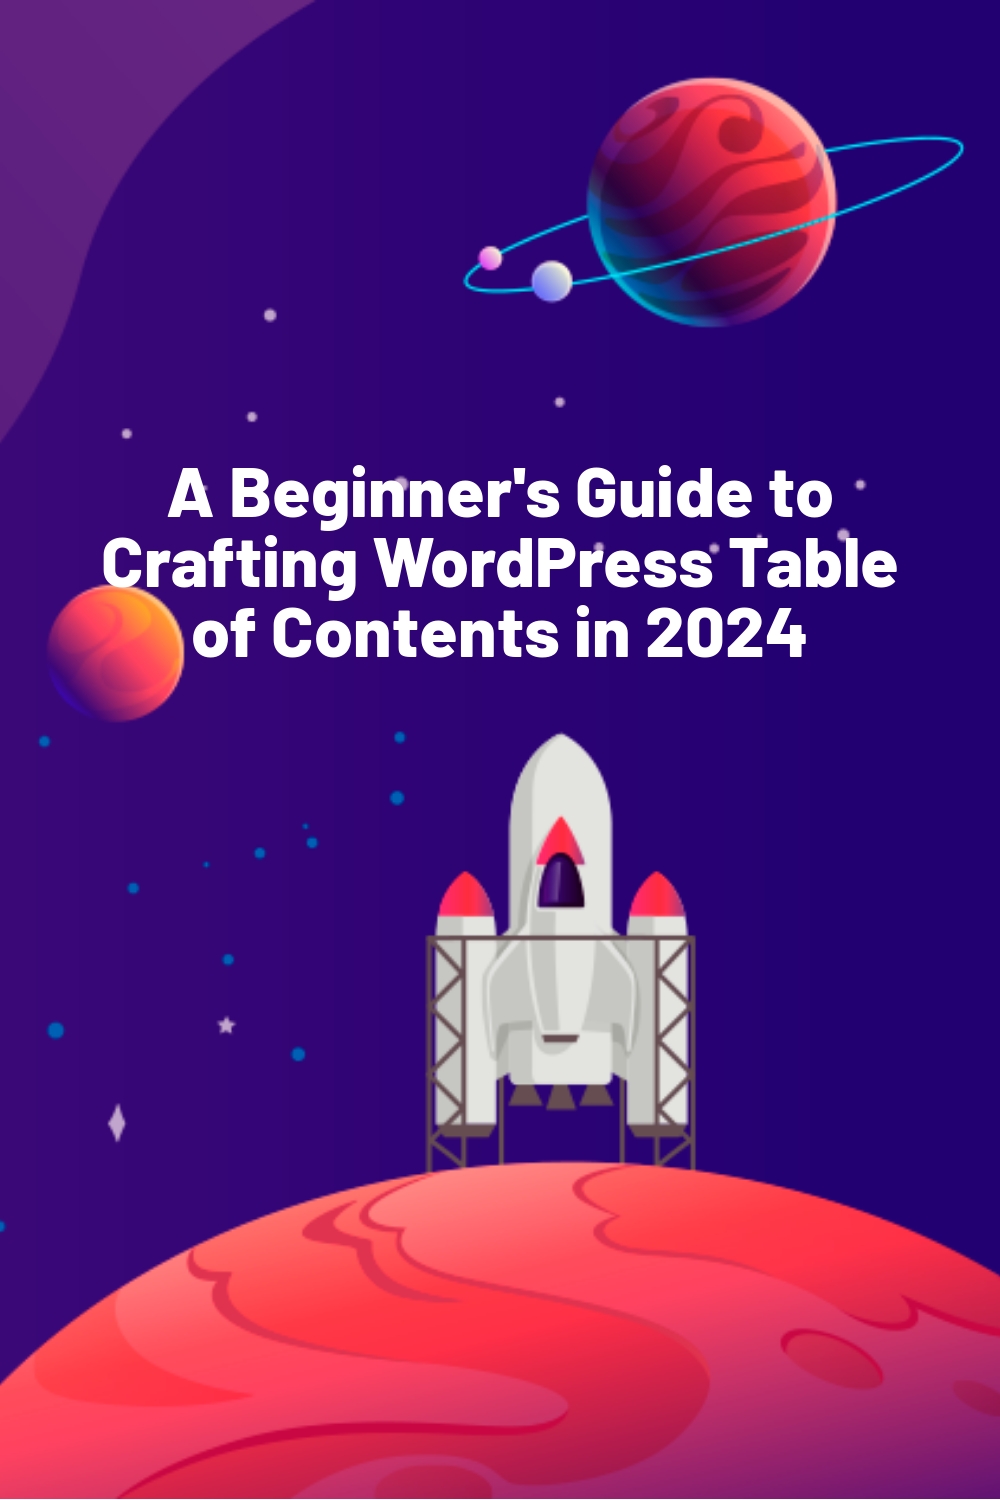 A Beginner’s Guide to Crafting WordPress Table of Contents in 2024